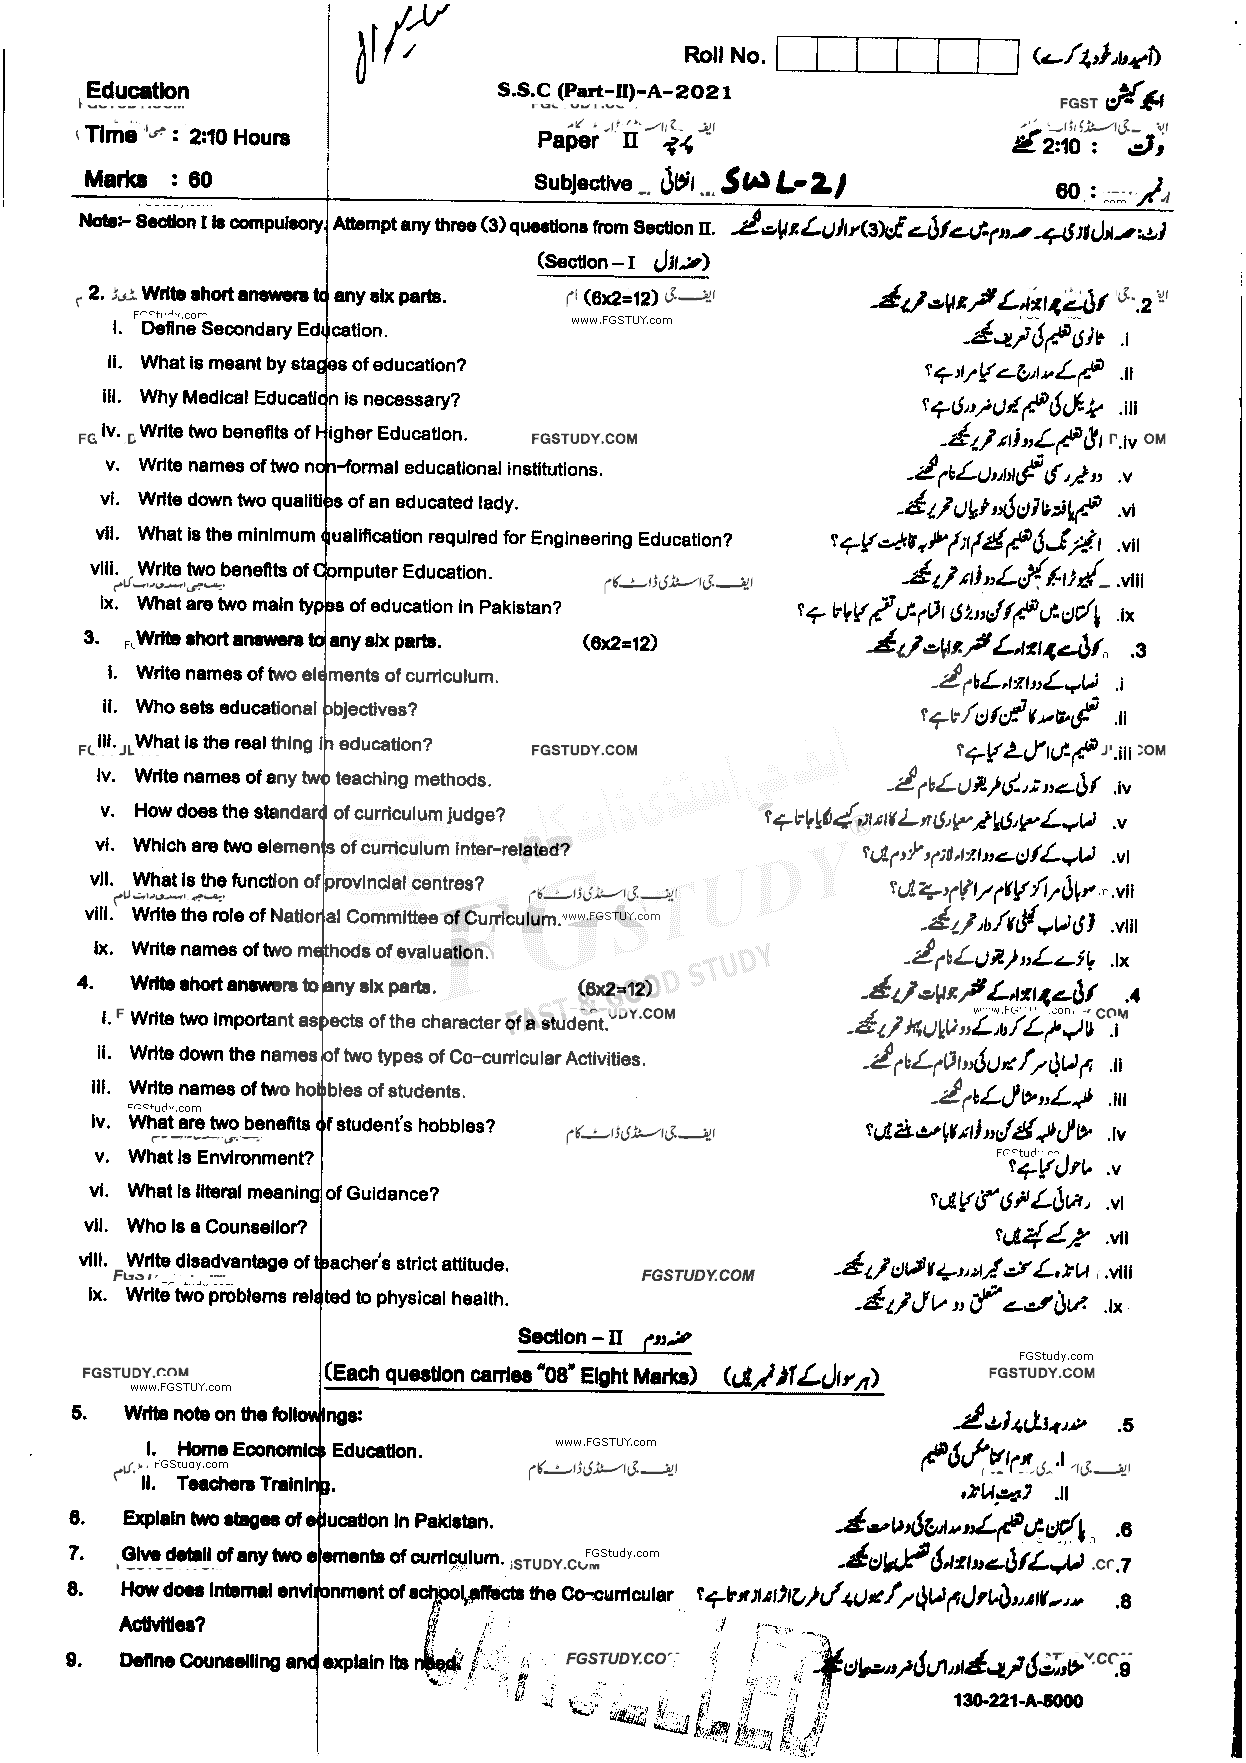 10th Class Education Past Paper 2021 Sahiwal Board Subjective